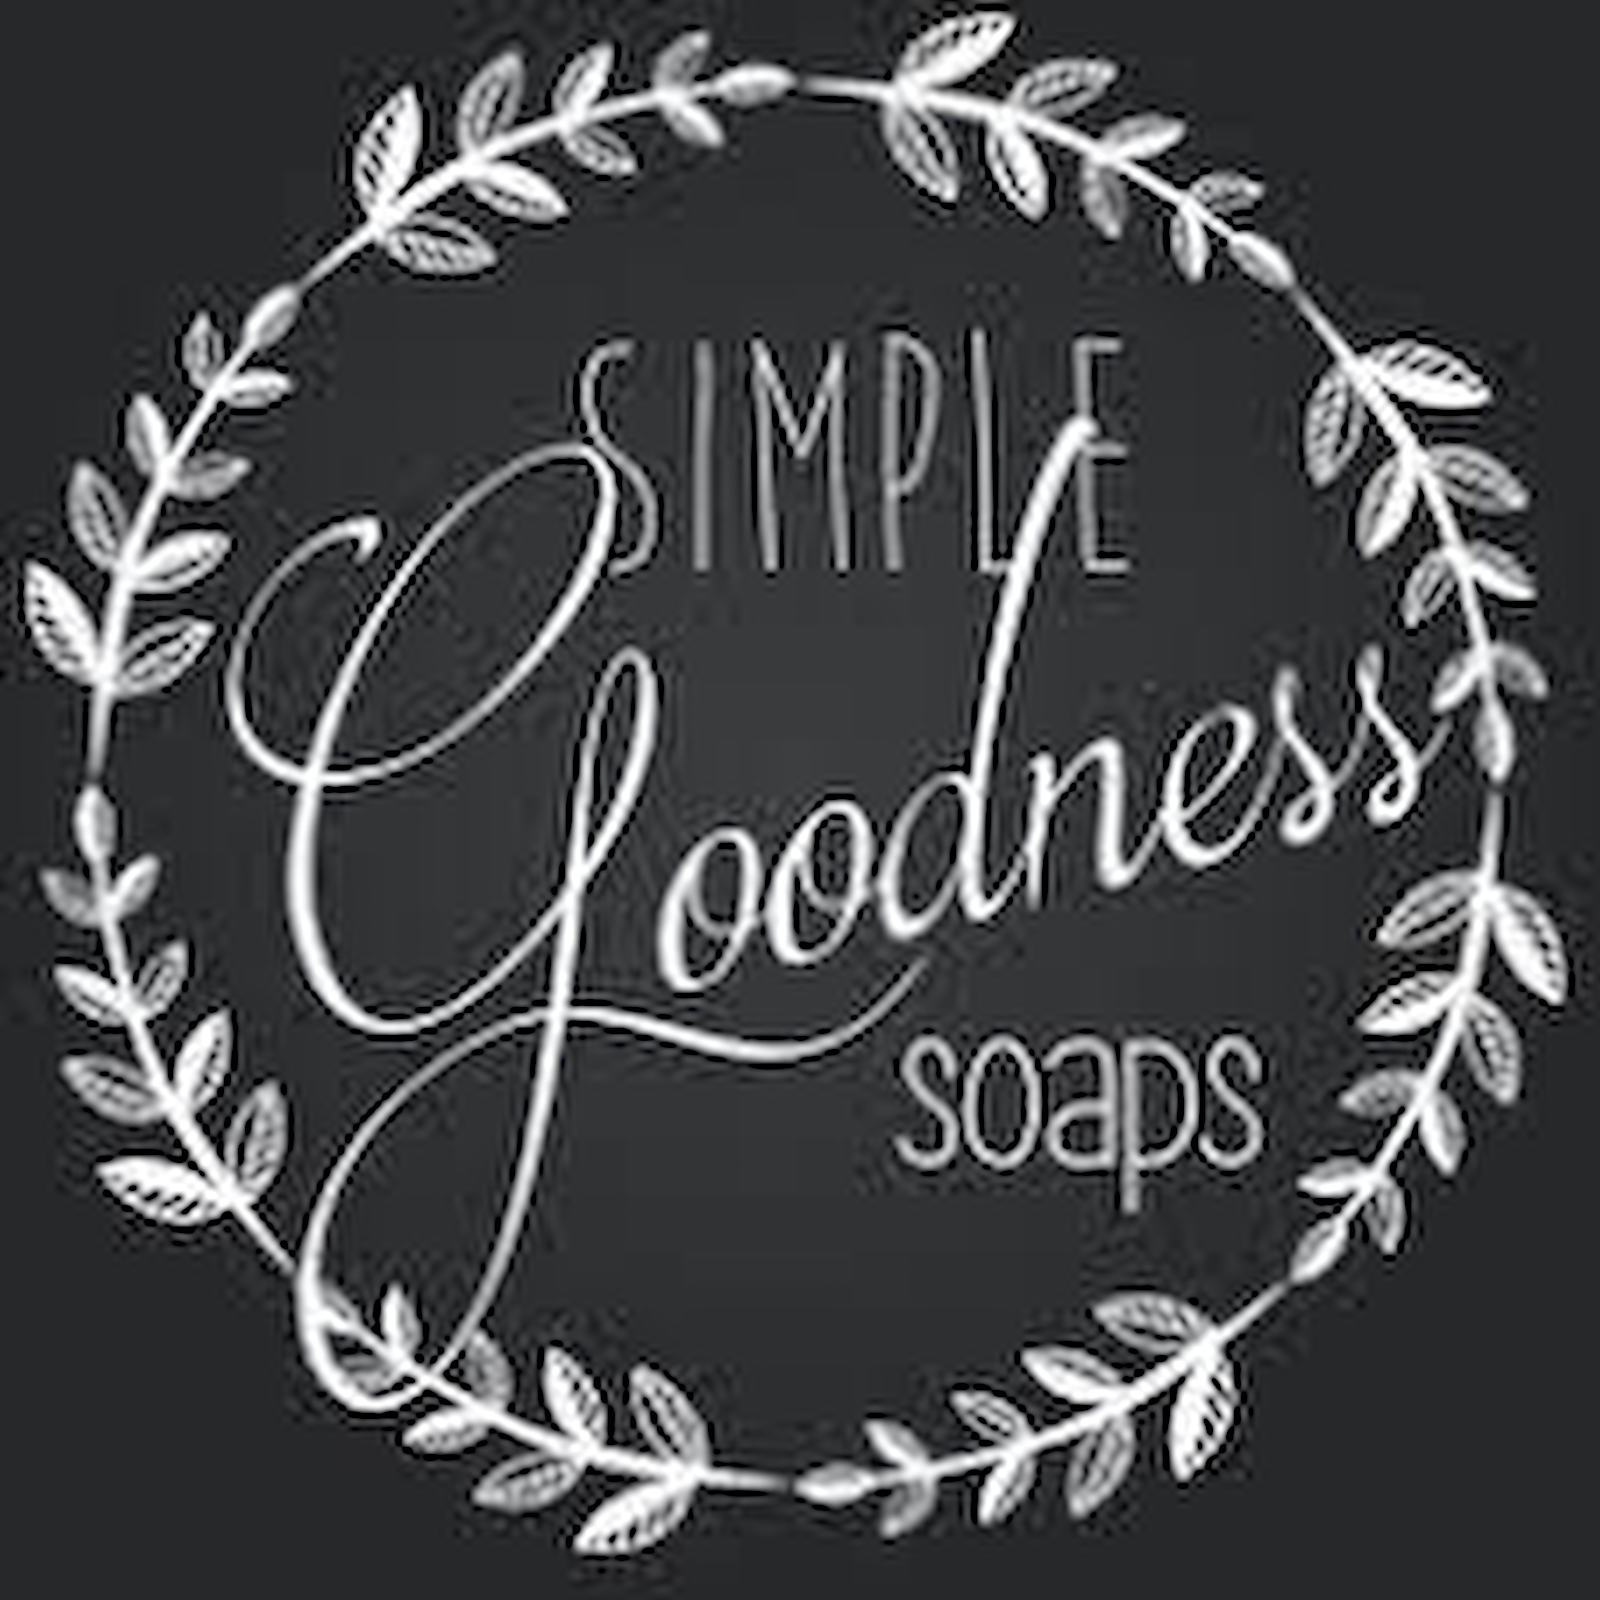 Simple Goodness Soaps